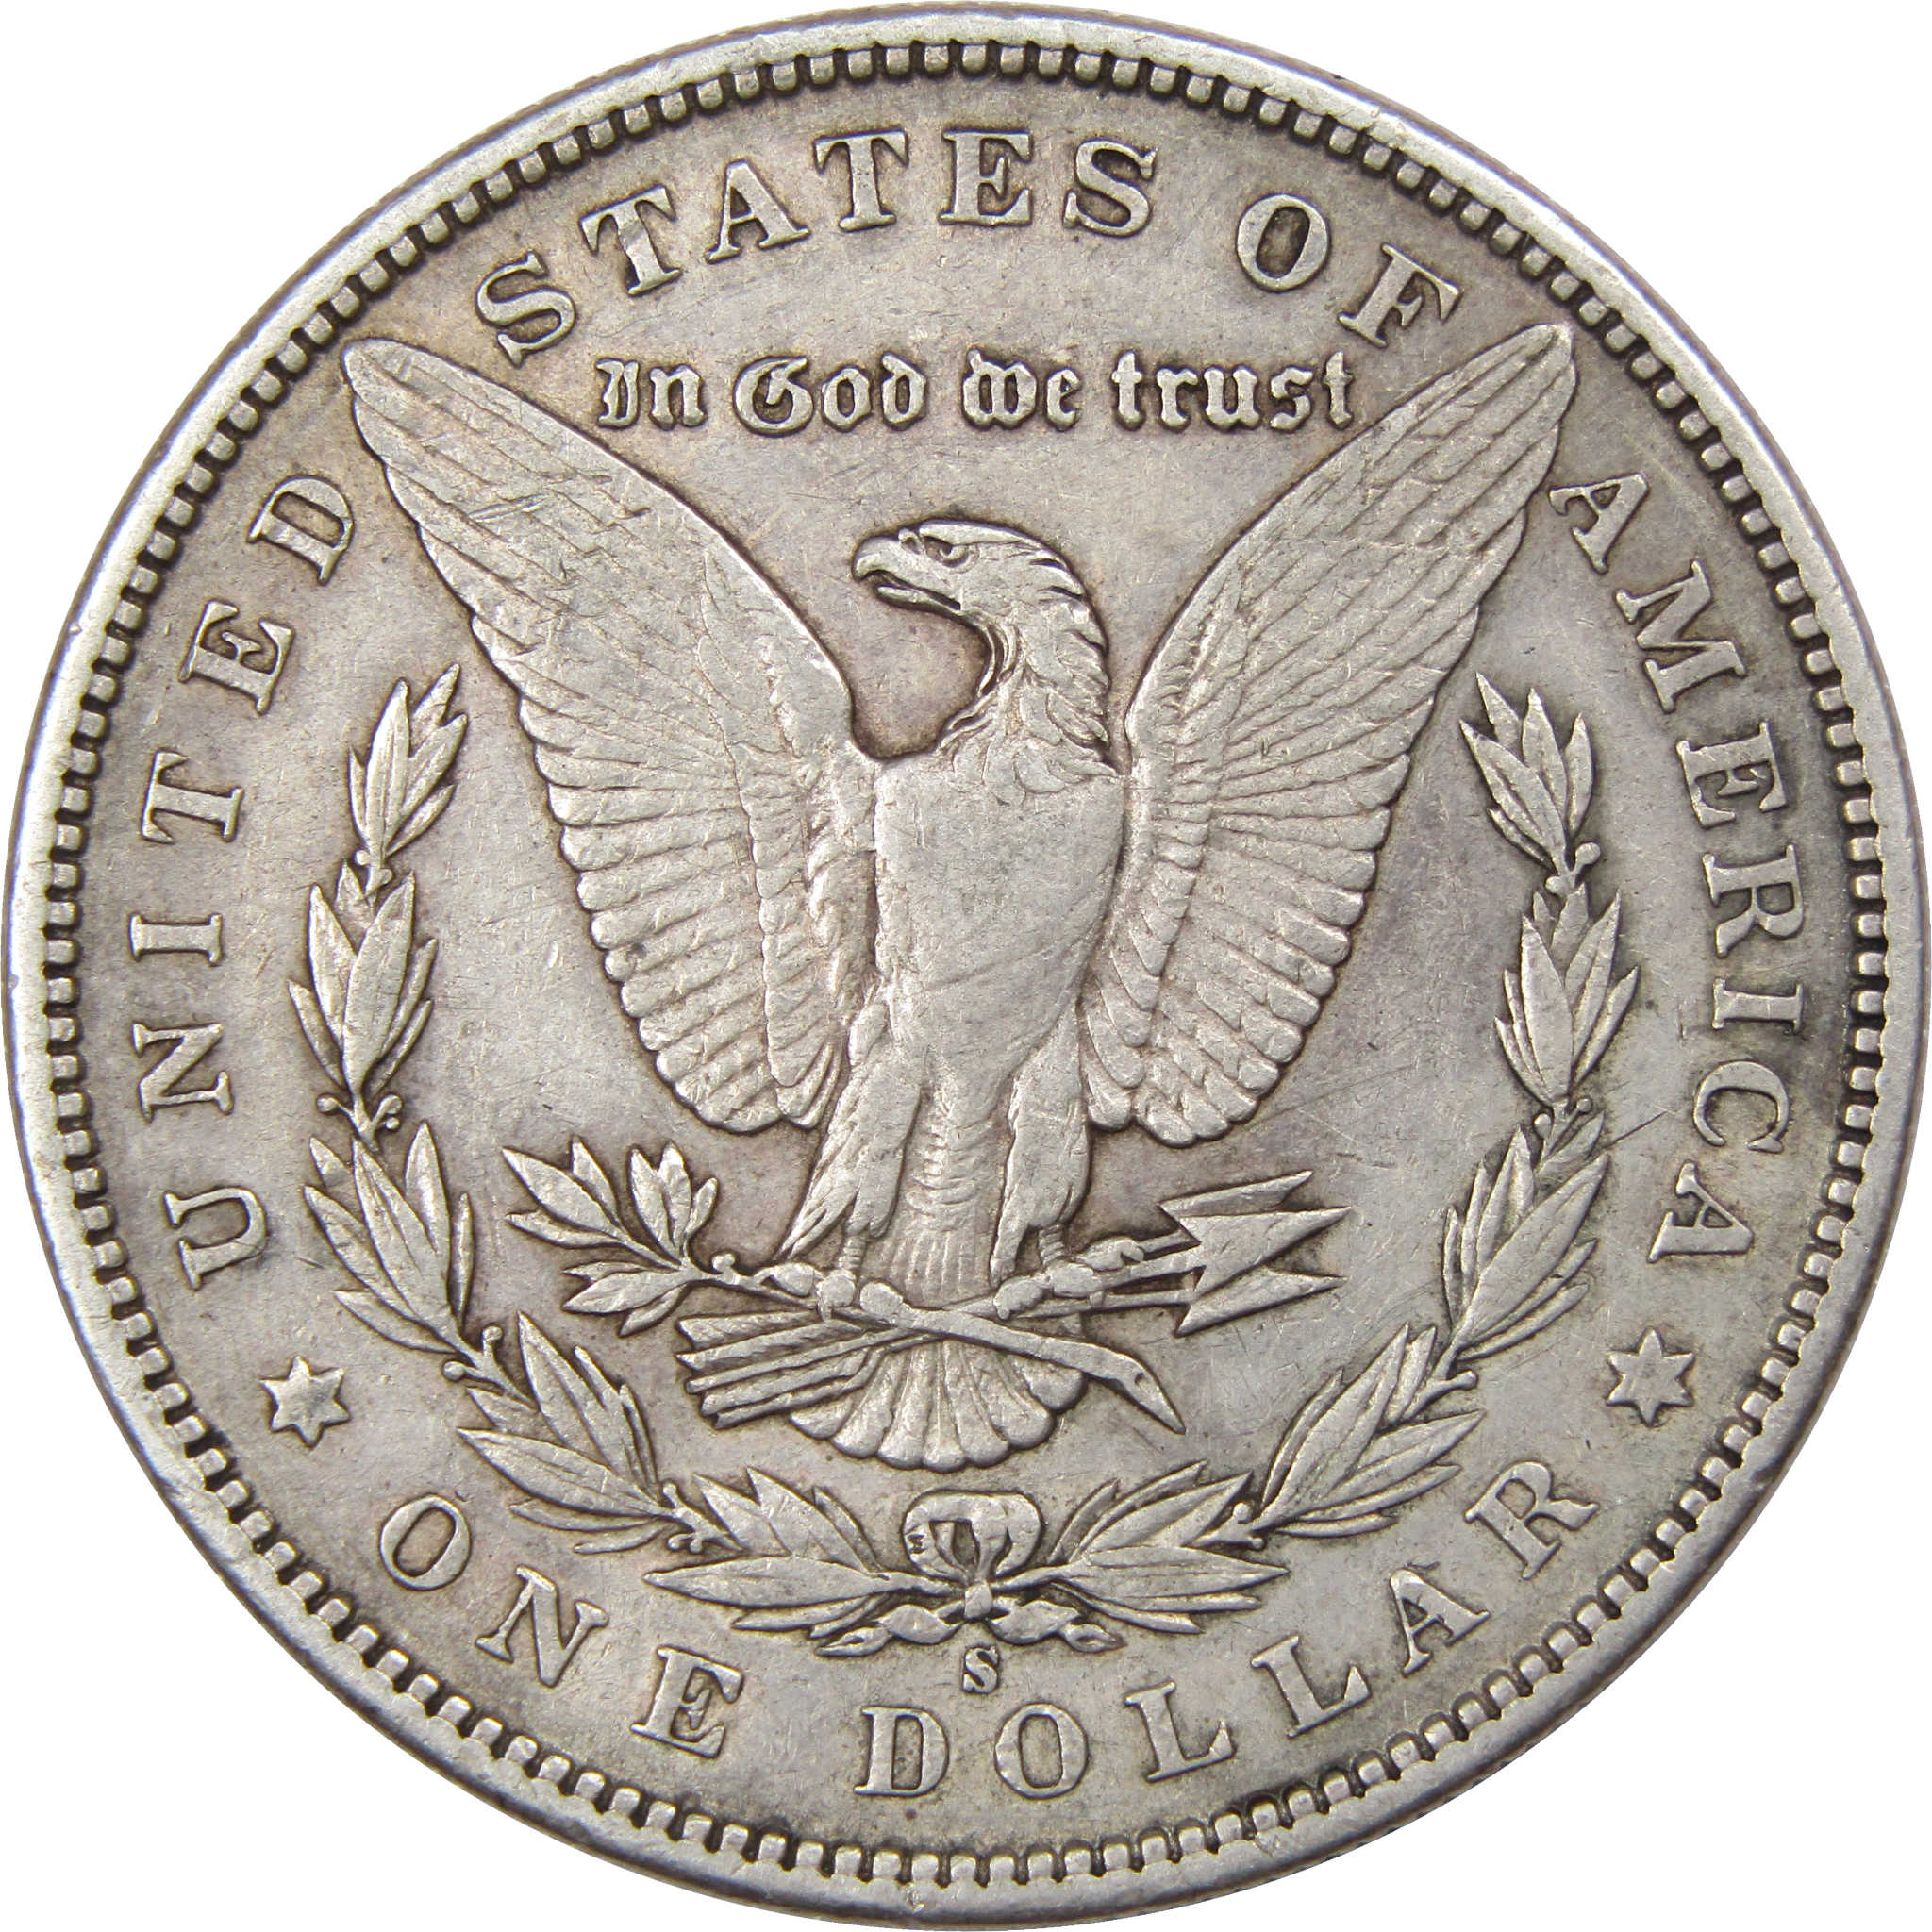 1898 S Morgan Dollar XF EF Extremely Fine 90% Silver Coin SKU:I1585 - Morgan coin - Morgan silver dollar - Morgan silver dollar for sale - Profile Coins &amp; Collectibles